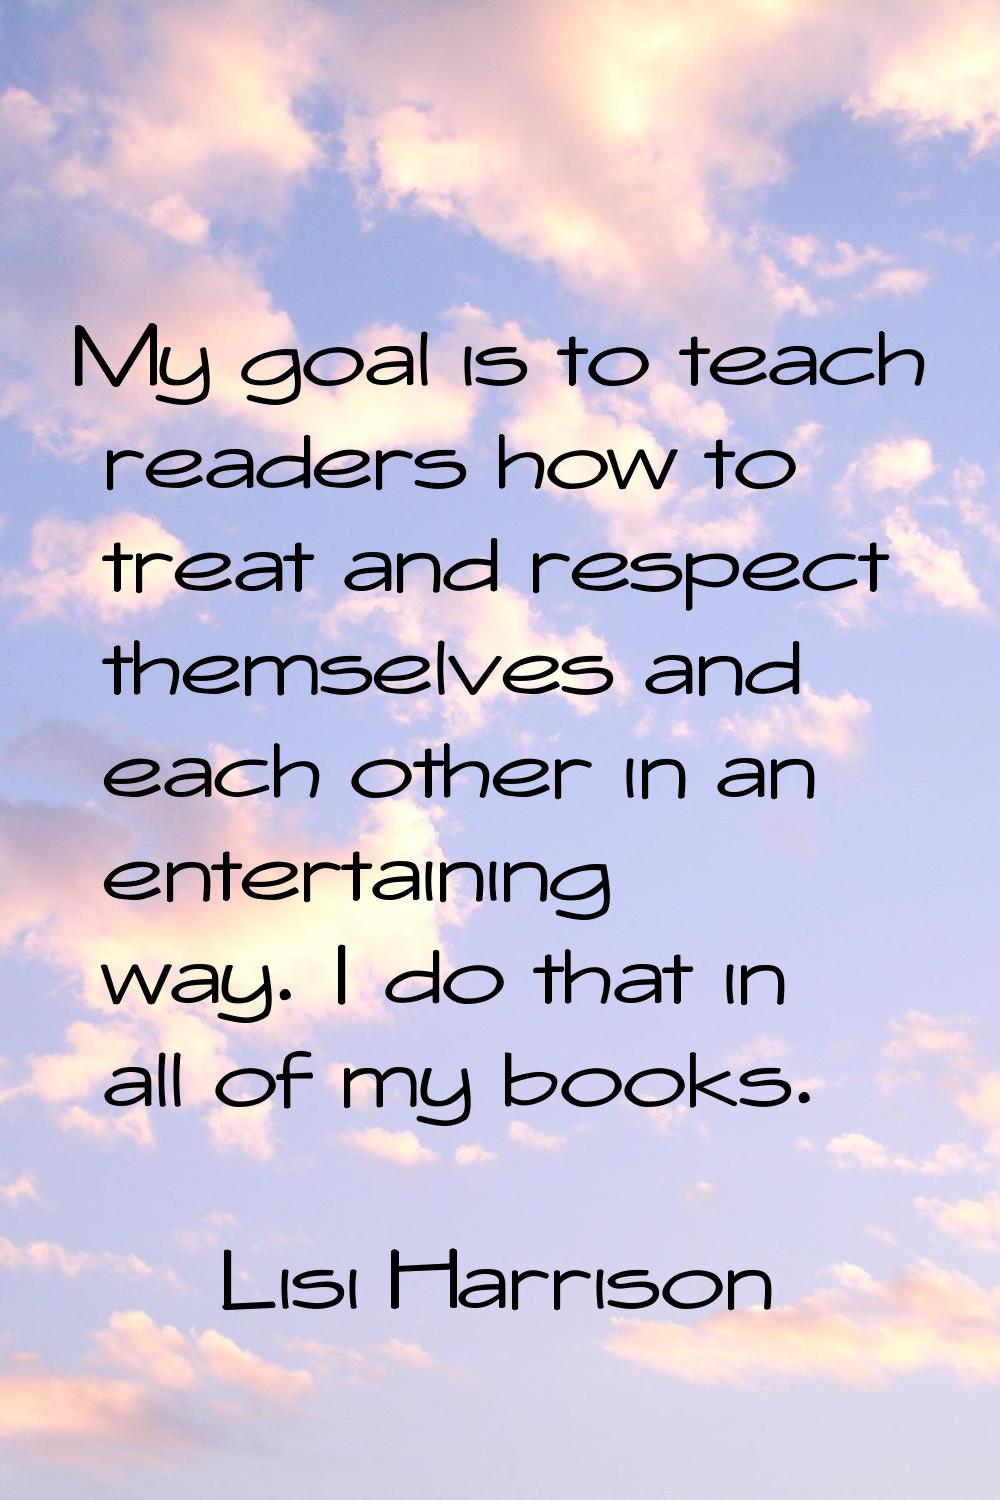 My goal is to teach readers how to treat and respect themselves and each other in an entertaining w